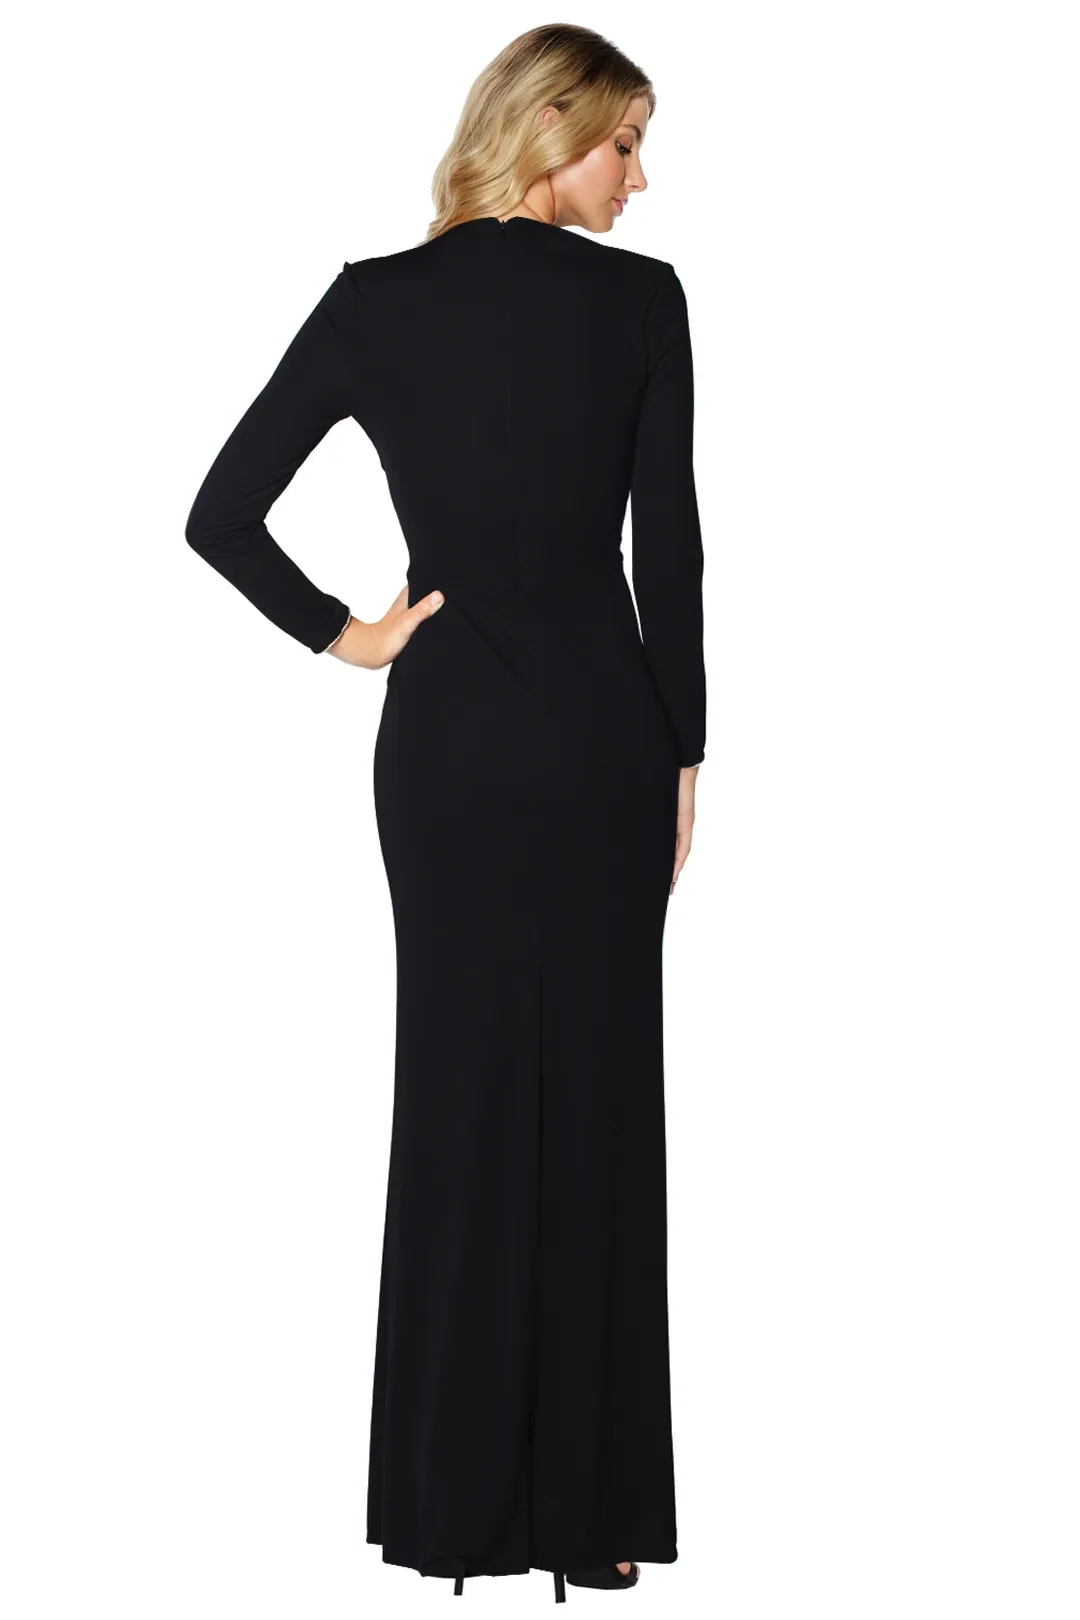 Rent the Valentina Gown for a formal occasion